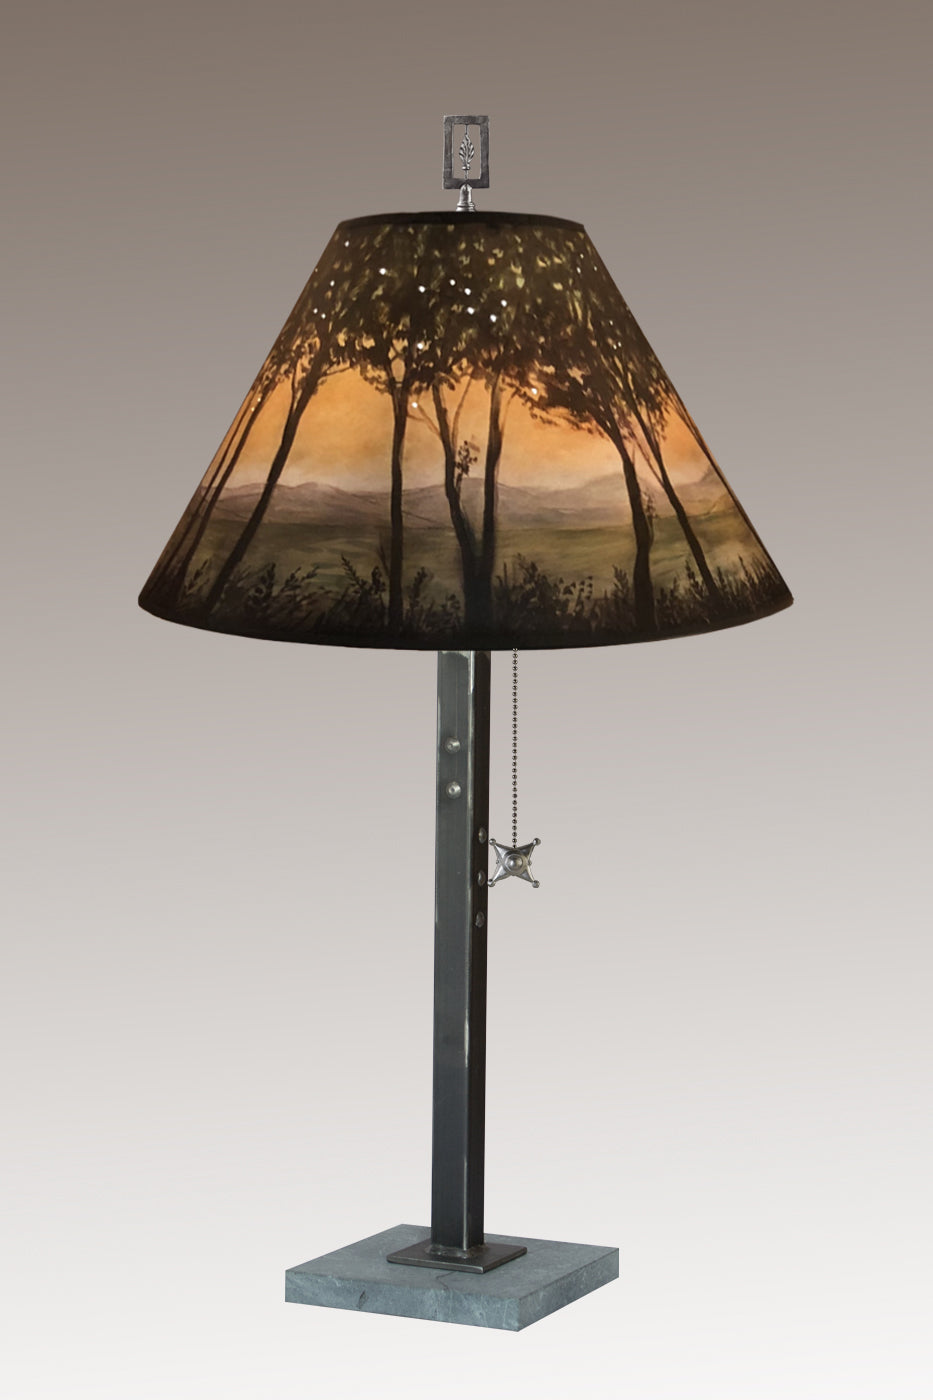 Janna Ugone & Co Table Lamps Steel Table Lamp with Medium Conical Shade in Dawn